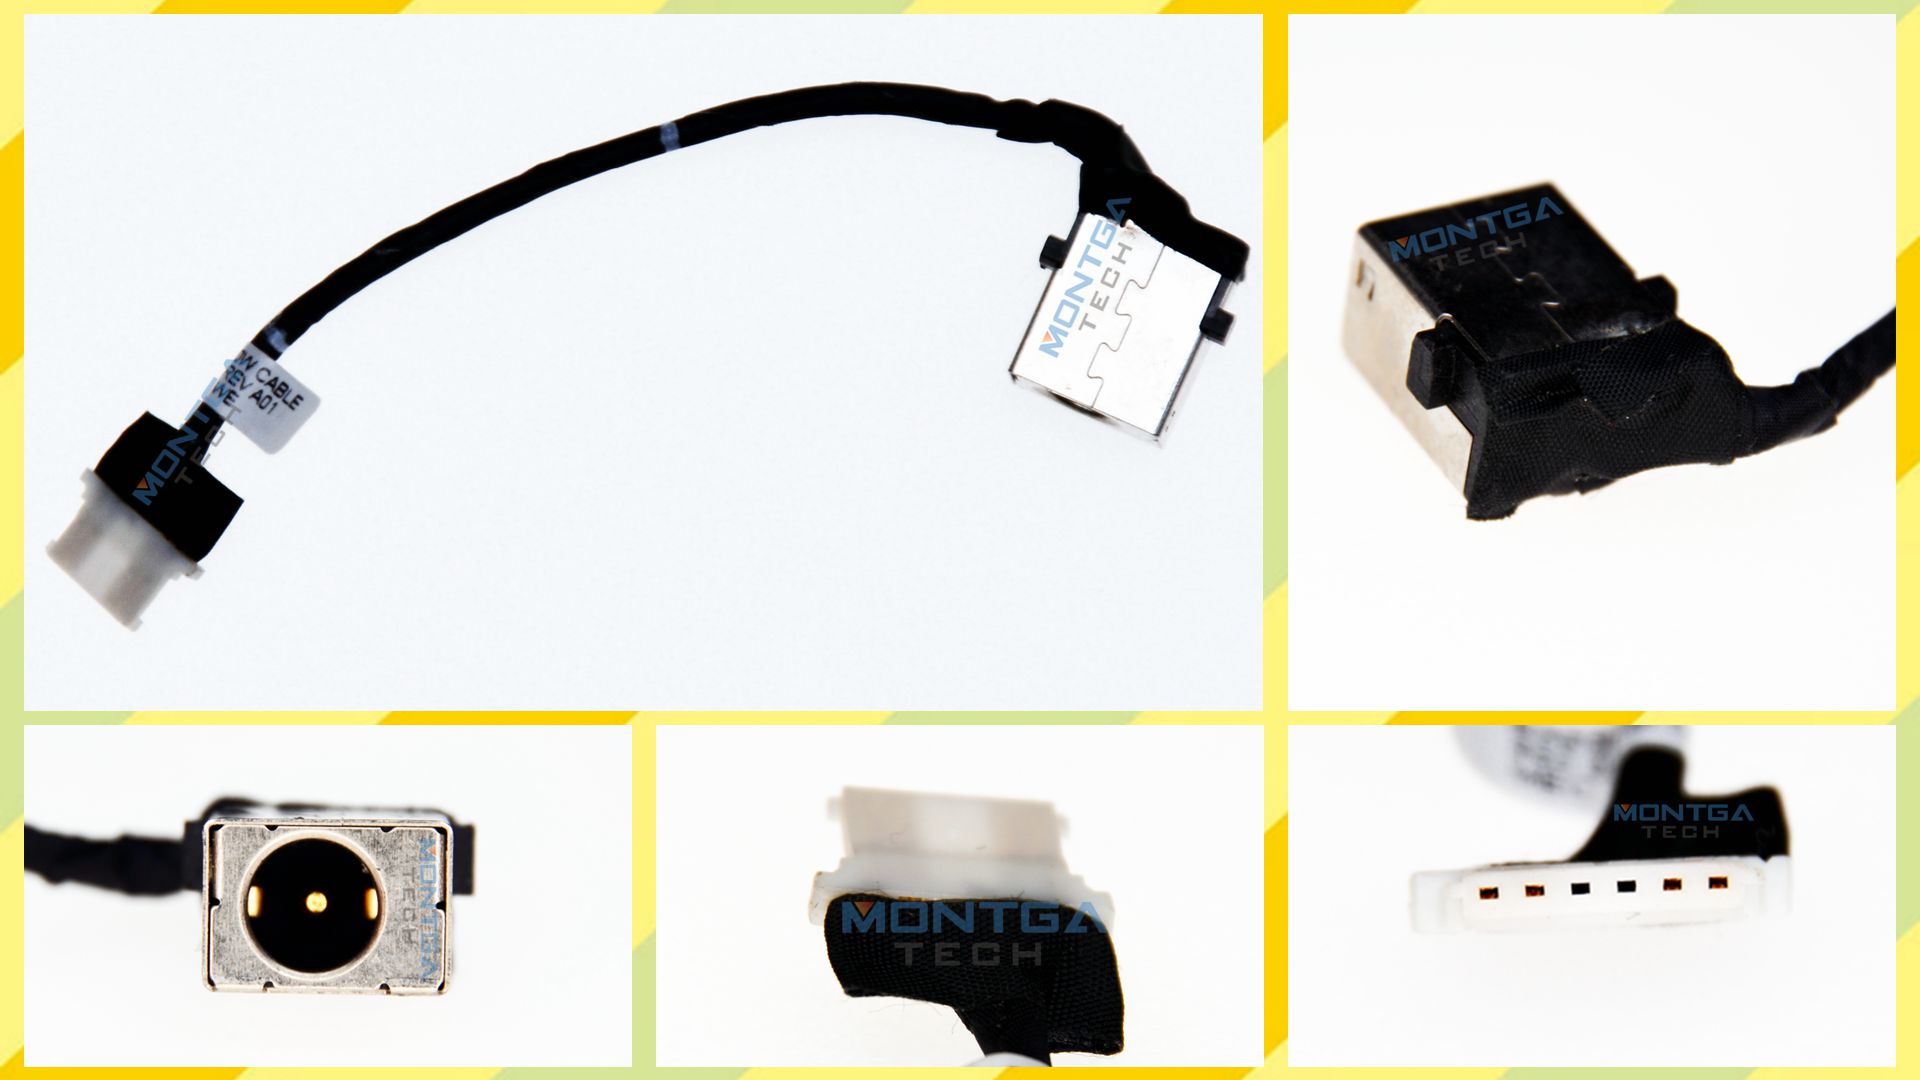 Packard Bell TG83 charging connector, Packard Bell TG83 DC Power Jack, Packard Bell TG83 DC IN Cable, Packard Bell TG83 Power Jack, Packard Bell TG83 plug, Packard Bell TG83 Jack socket, Packard Bell TG83 connecteur de charge, 